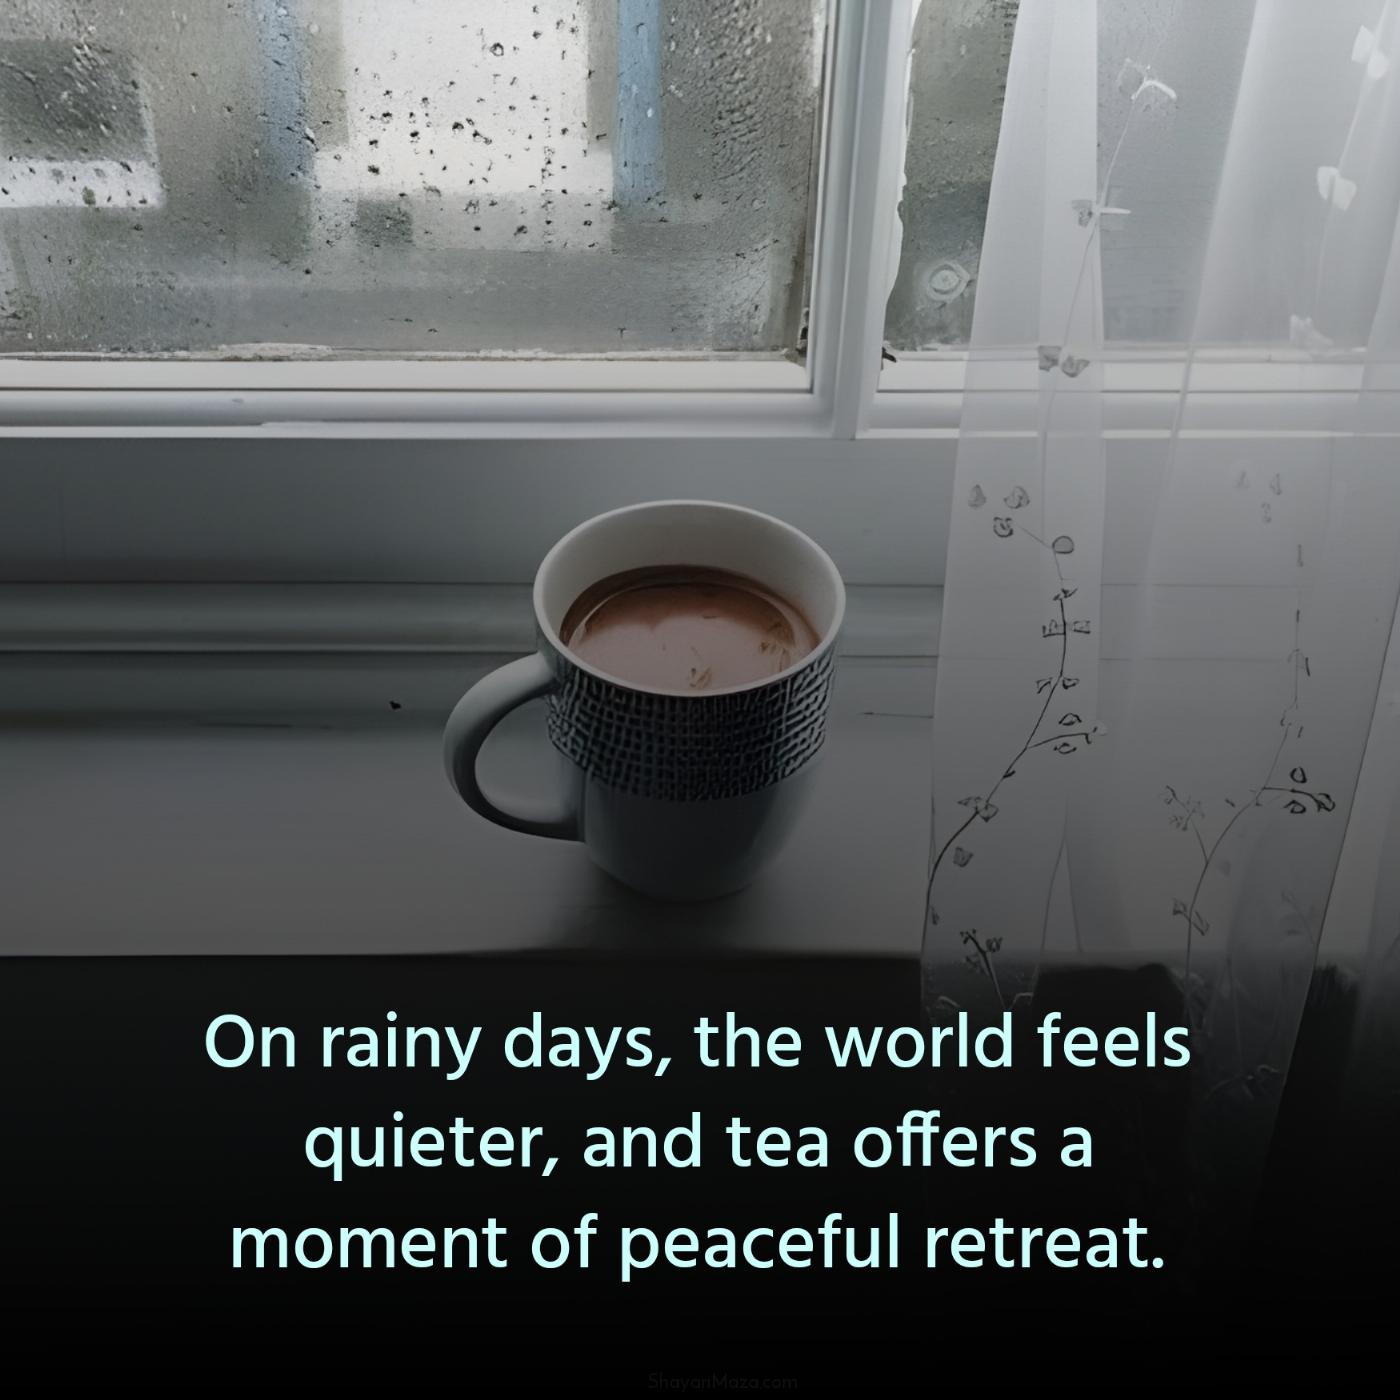 On rainy days the world feels quieter and tea offers a moment